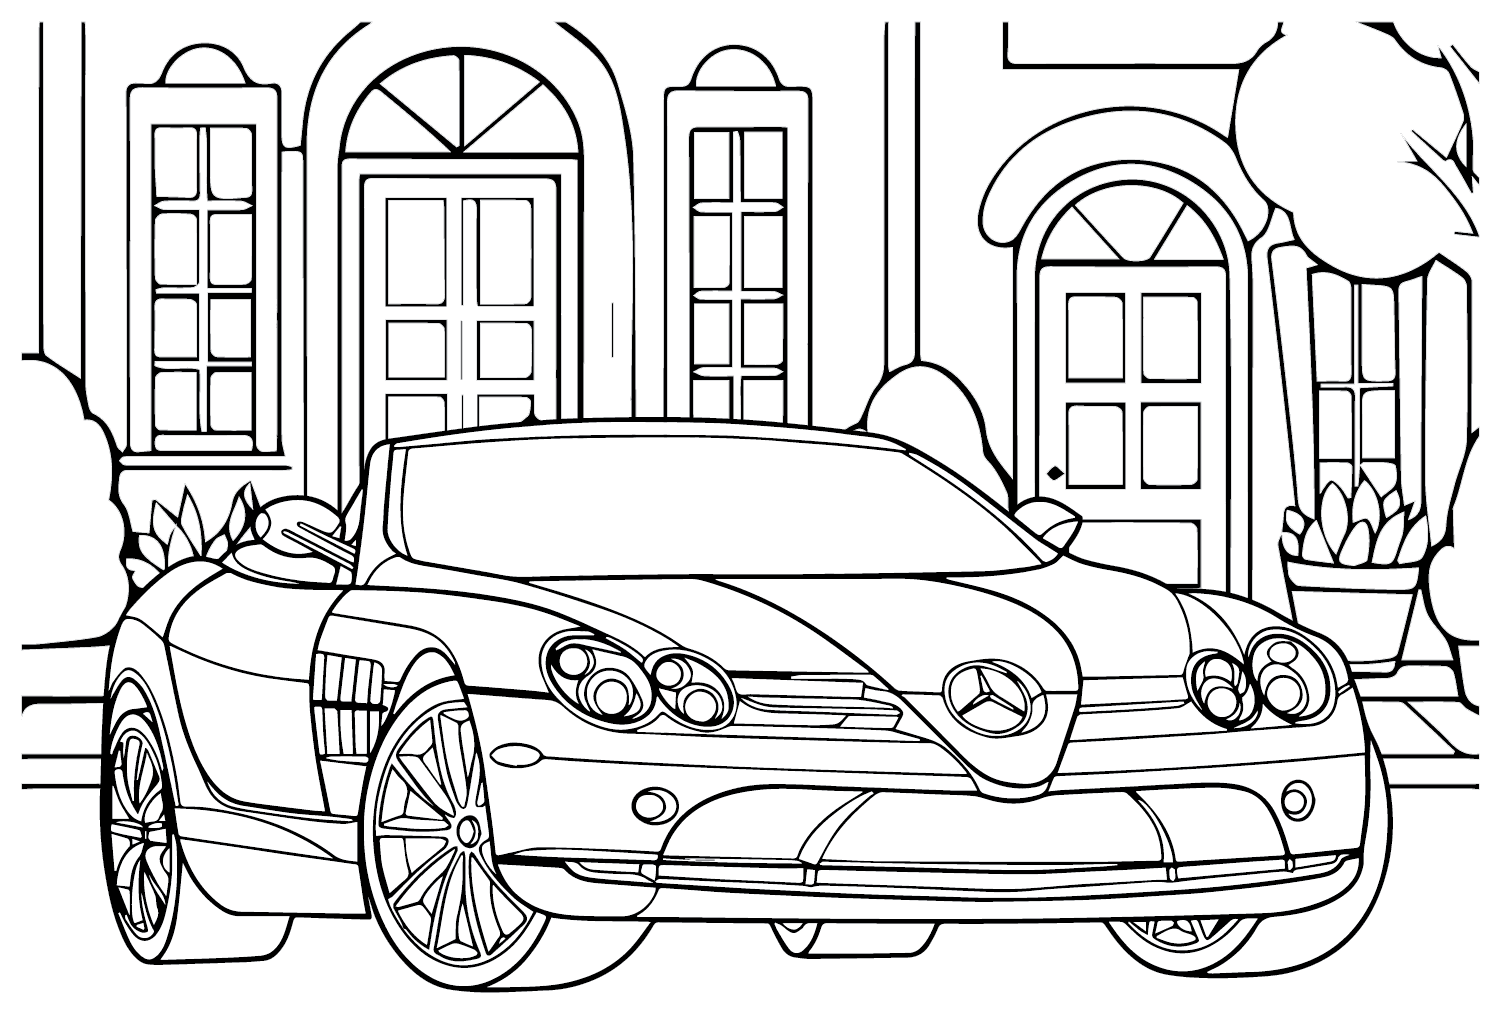 Mercedes-Benz SLR McLaren Coloring Page from Mercedes-Benz